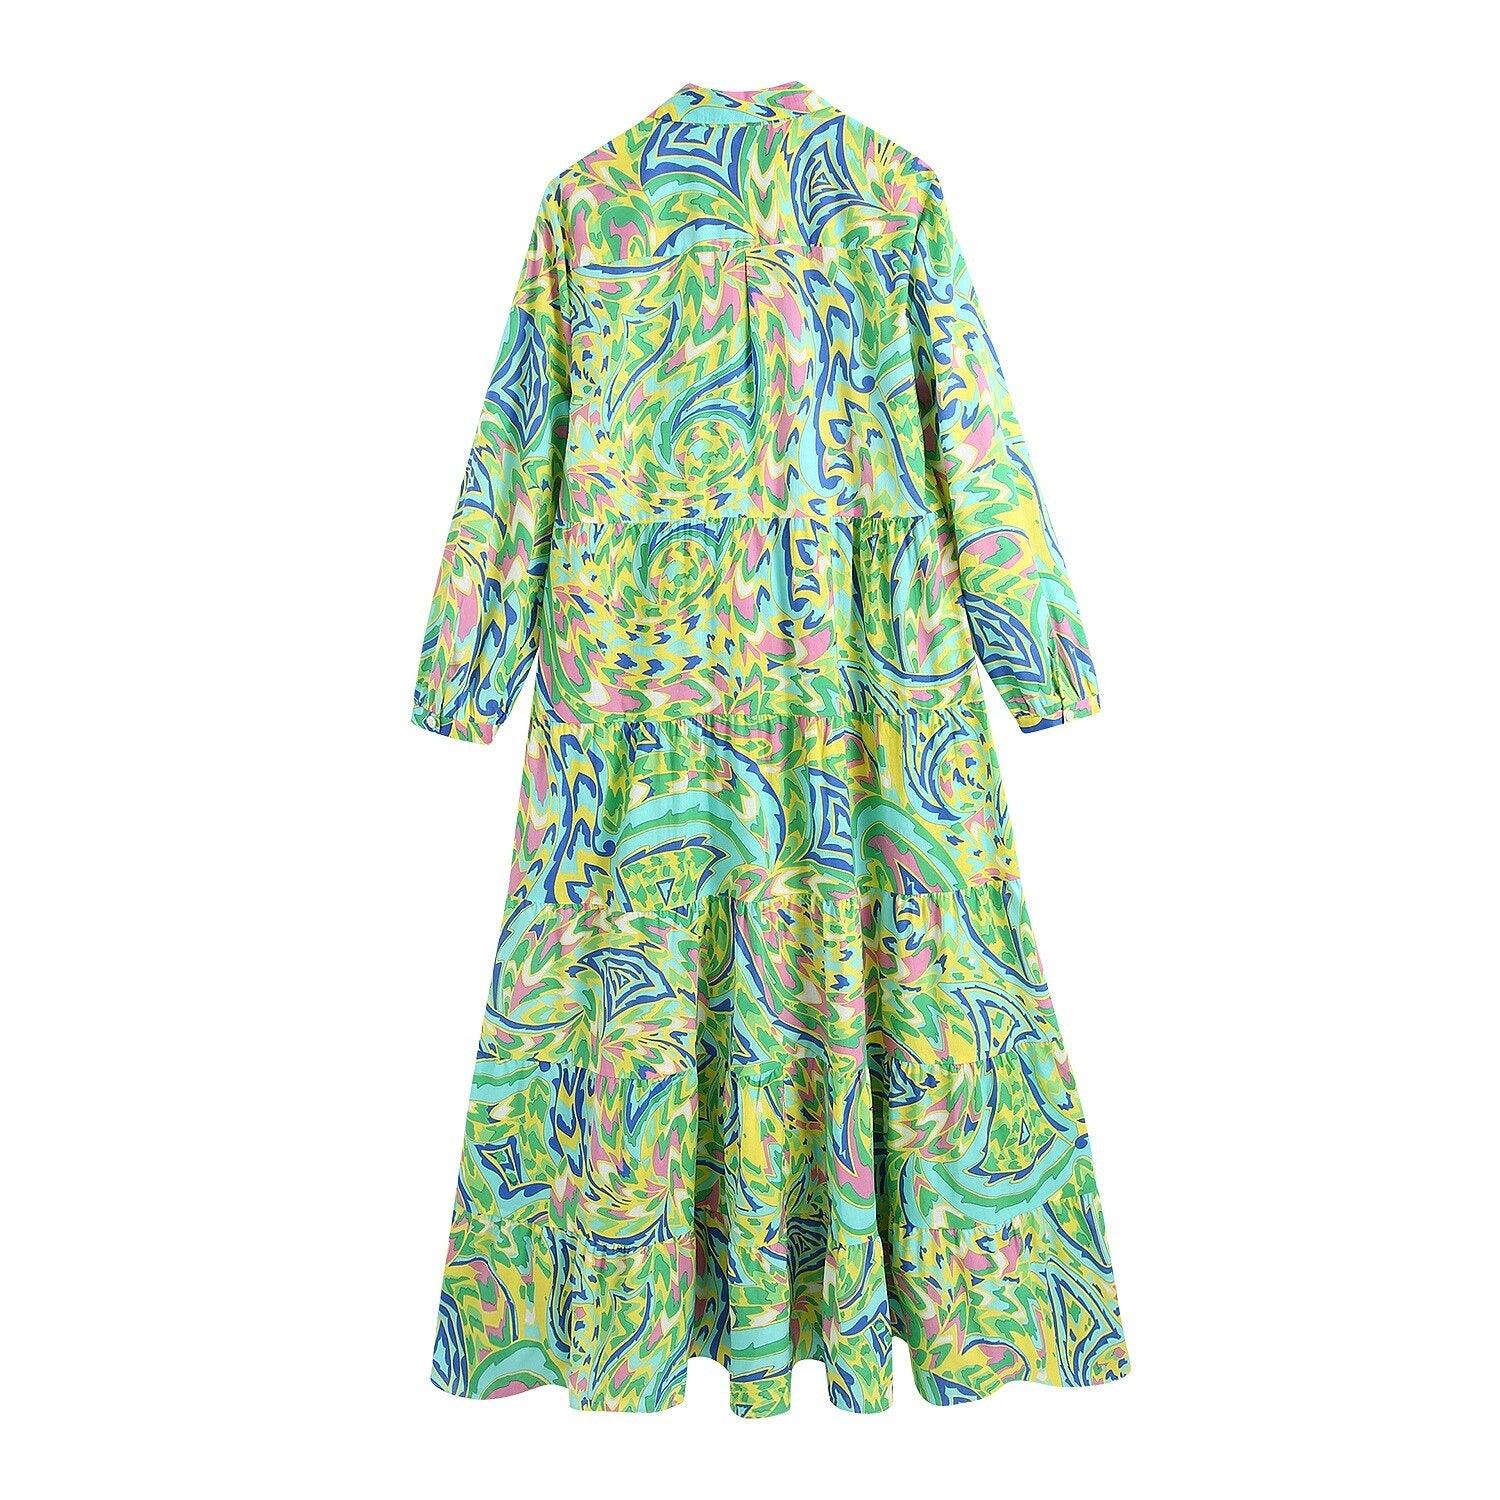 Feel Bright - Floral long sleeve dress Try Modest